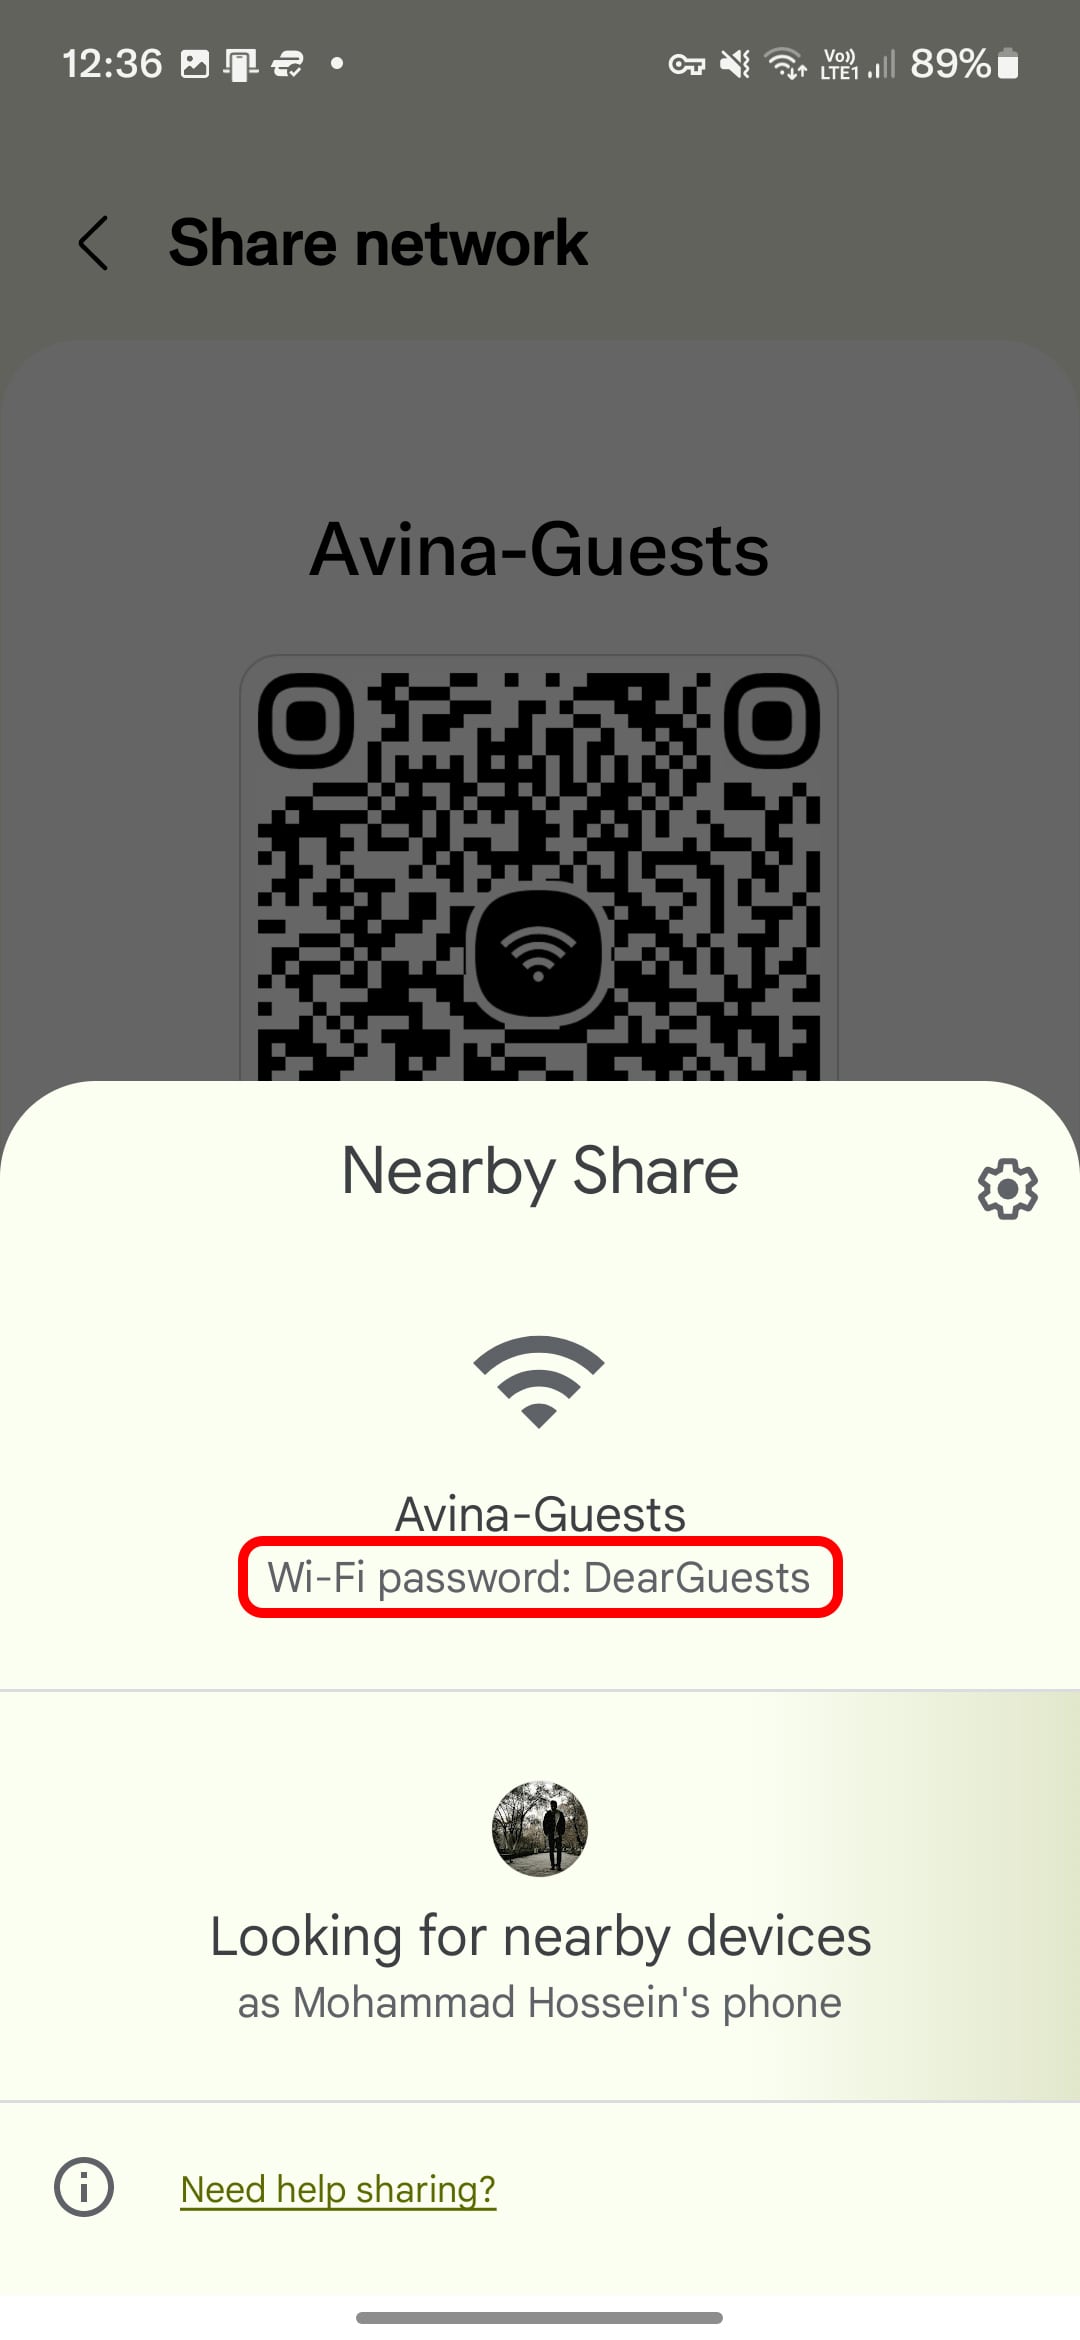 The sixth step is to find the Wi-Fi password on the Samsung phone